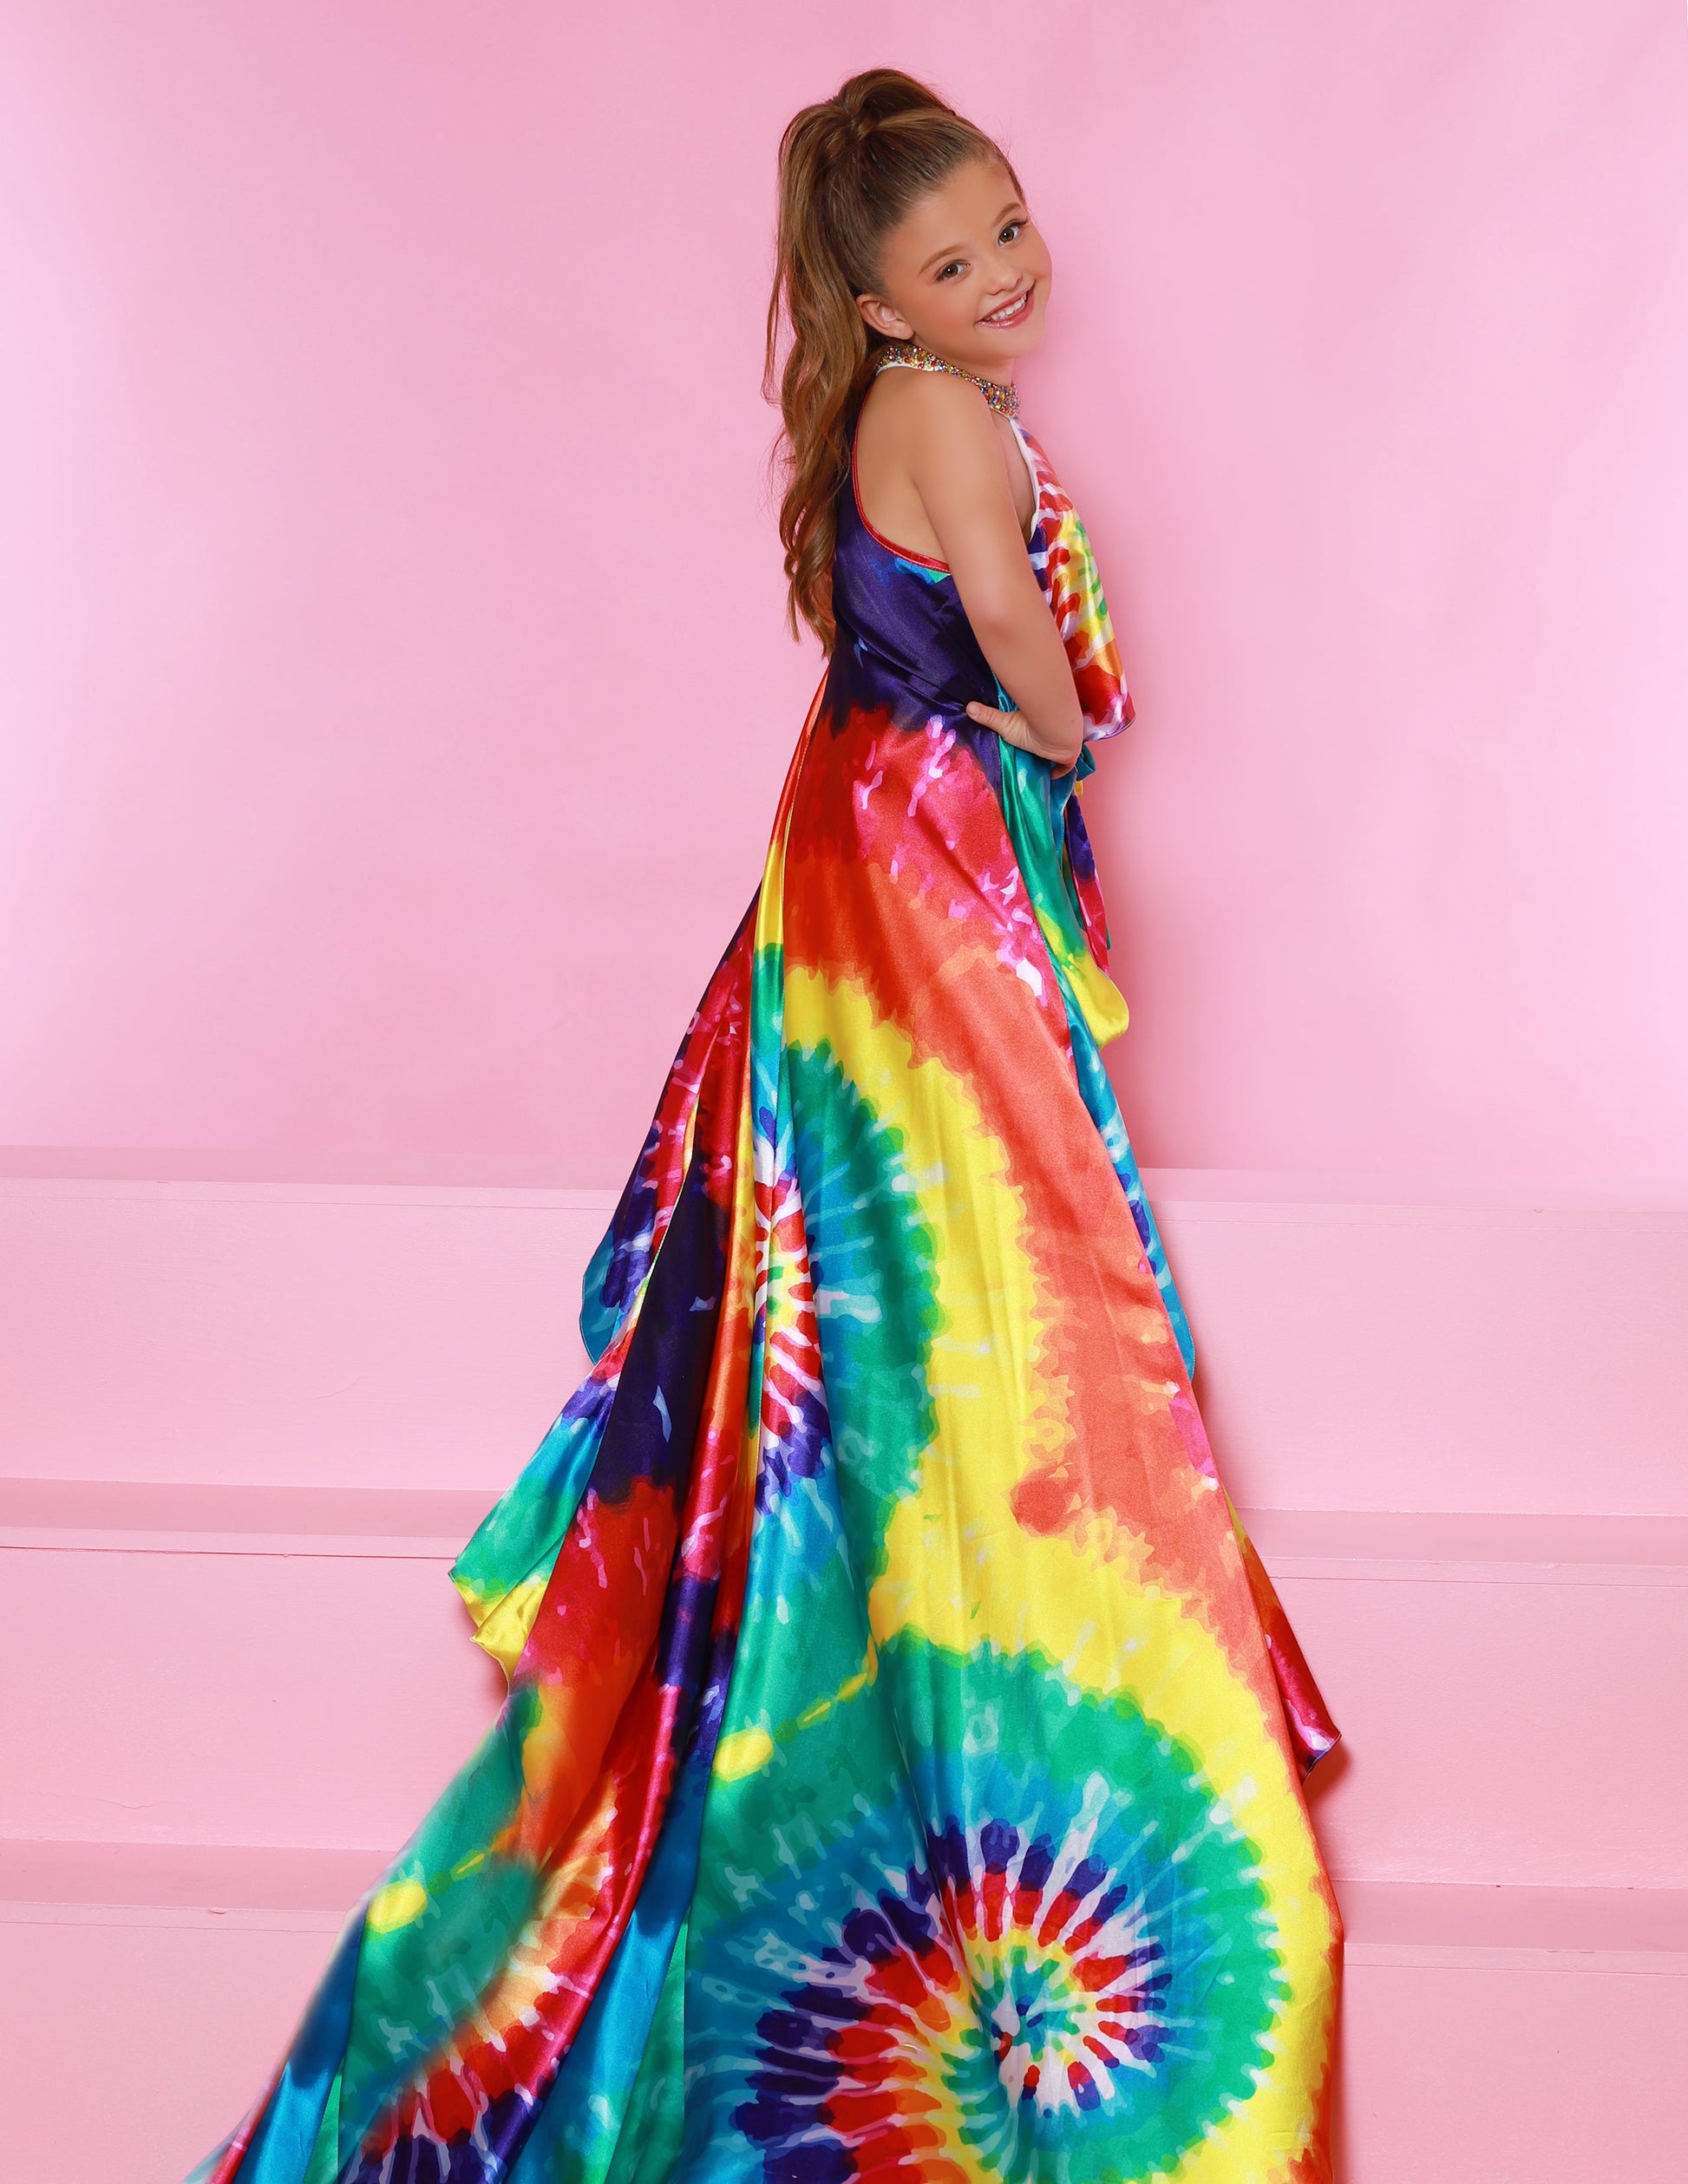 Sugar Kayne C159 is a two piece fun fashion Tie Dye Girls Pageant Wear Featuring an embellished choker high neckline flowing into a long train.  Colors:  Tie Dye  Sizes:  2-16  (Sizes 2-6 do not have bust cups, Sizes 8-16 will have preteen size bust cups)